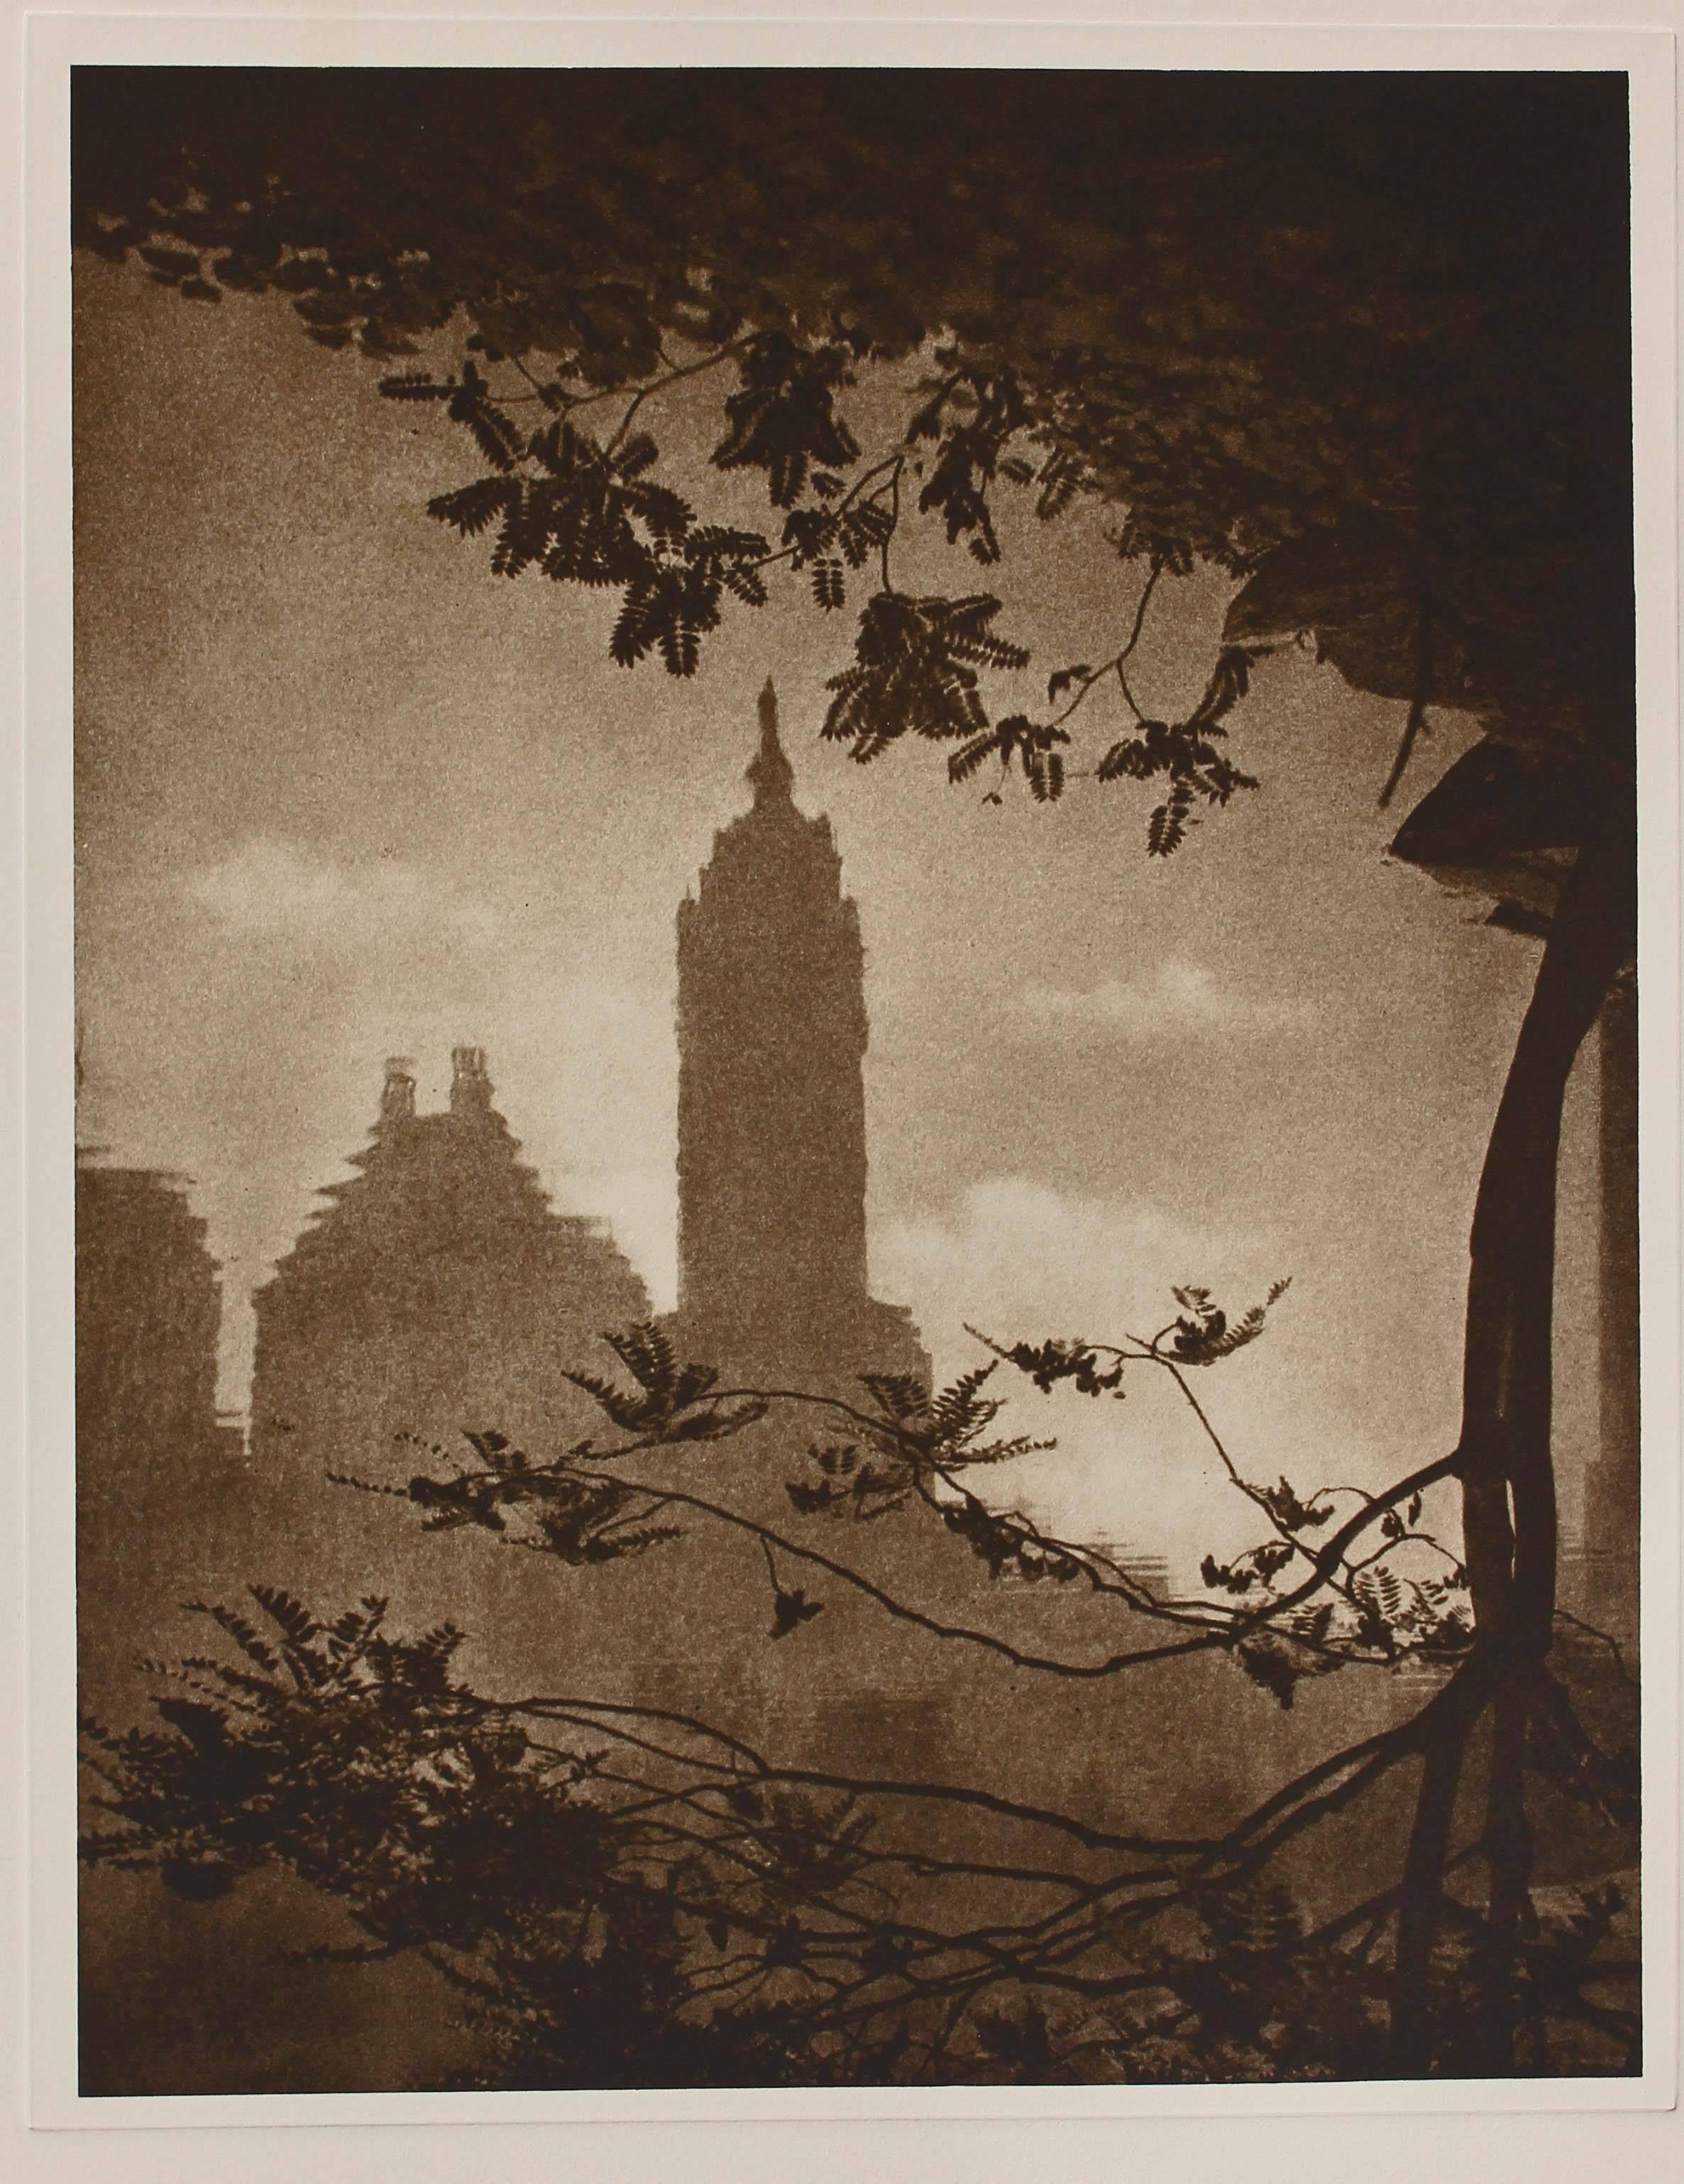 Original vintage photogravure, photography by Adolf Fassbender from his book Pictorial Artistry: The Dramatization of the Beautiful. From a limited edition of 1000. 11